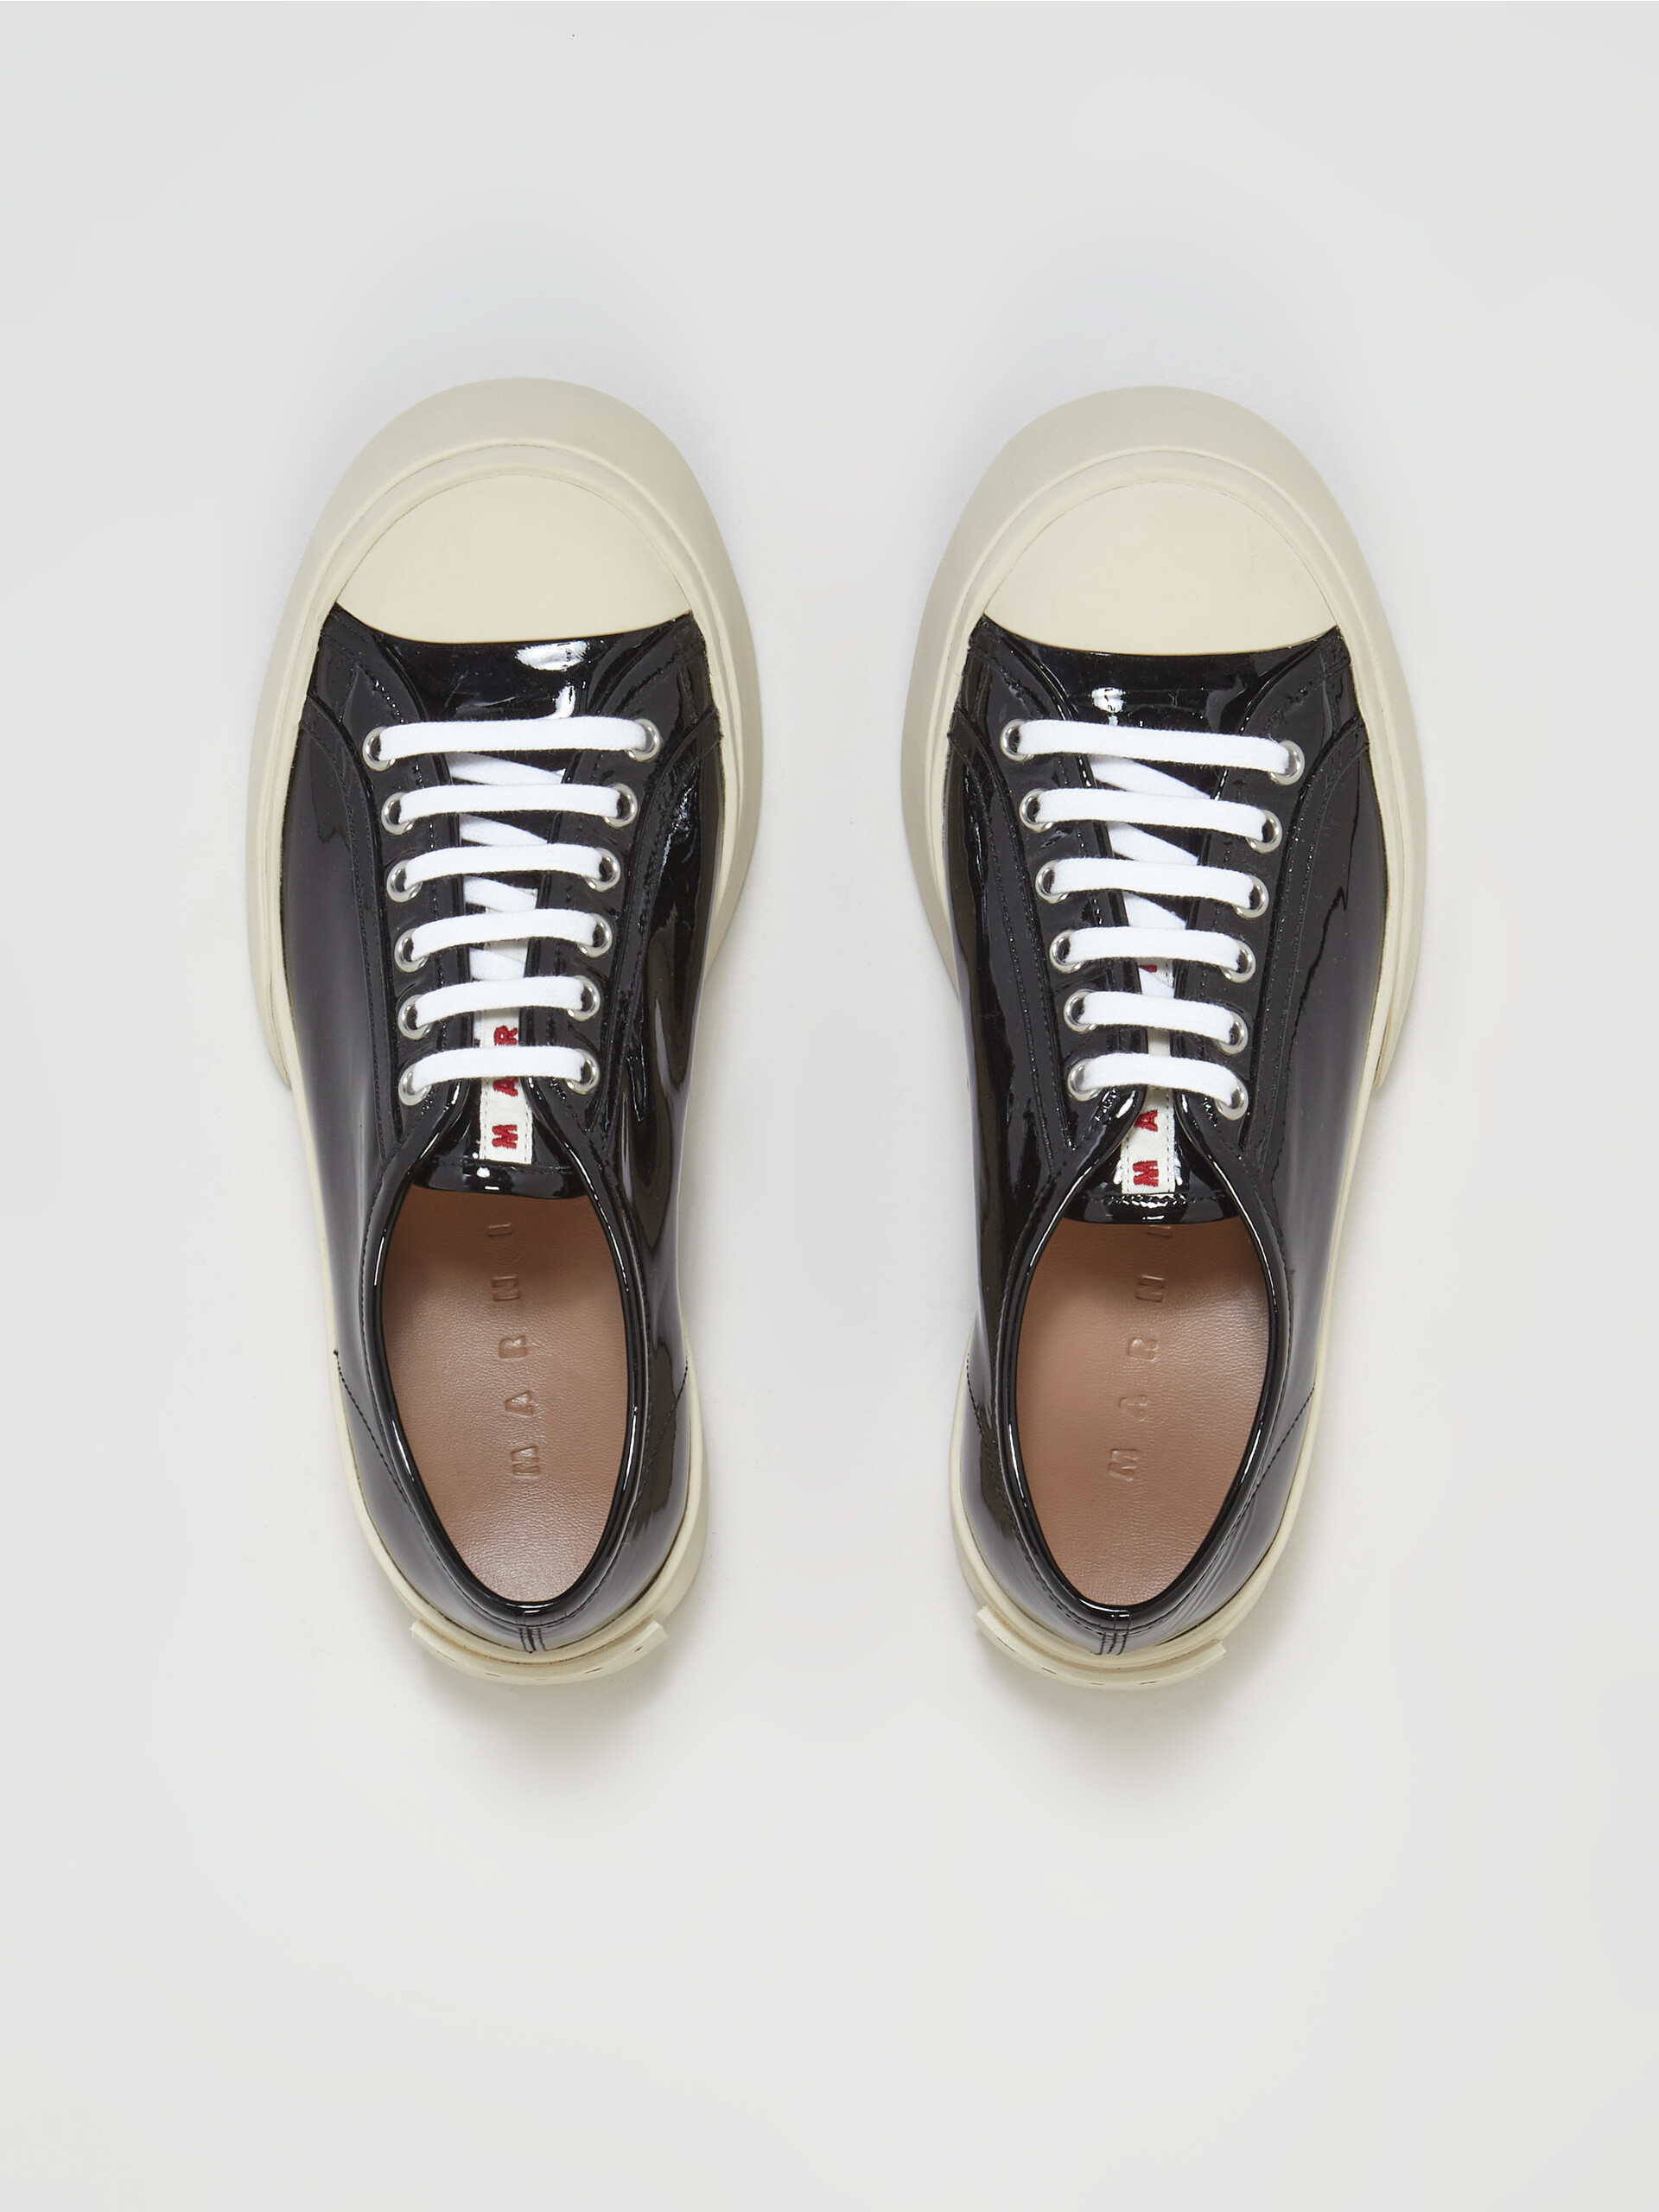 Black patent leather PABLO lace-up sneaker